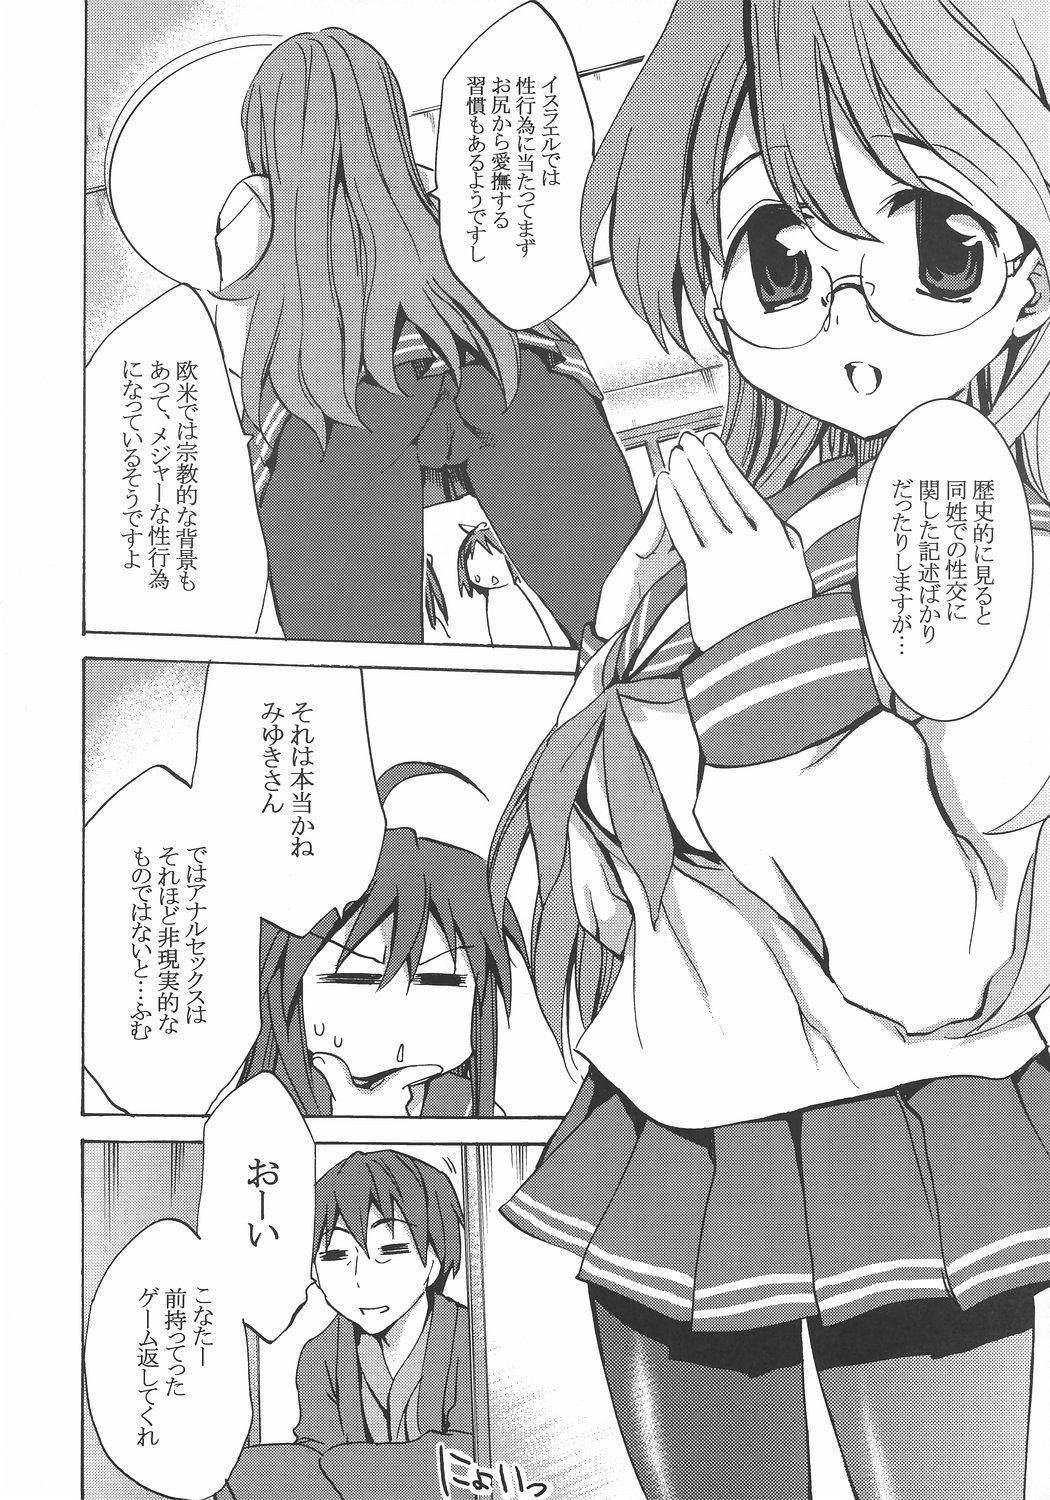 Sucking Cocks Megane, Megane!! - Lucky star Adorable - Page 7